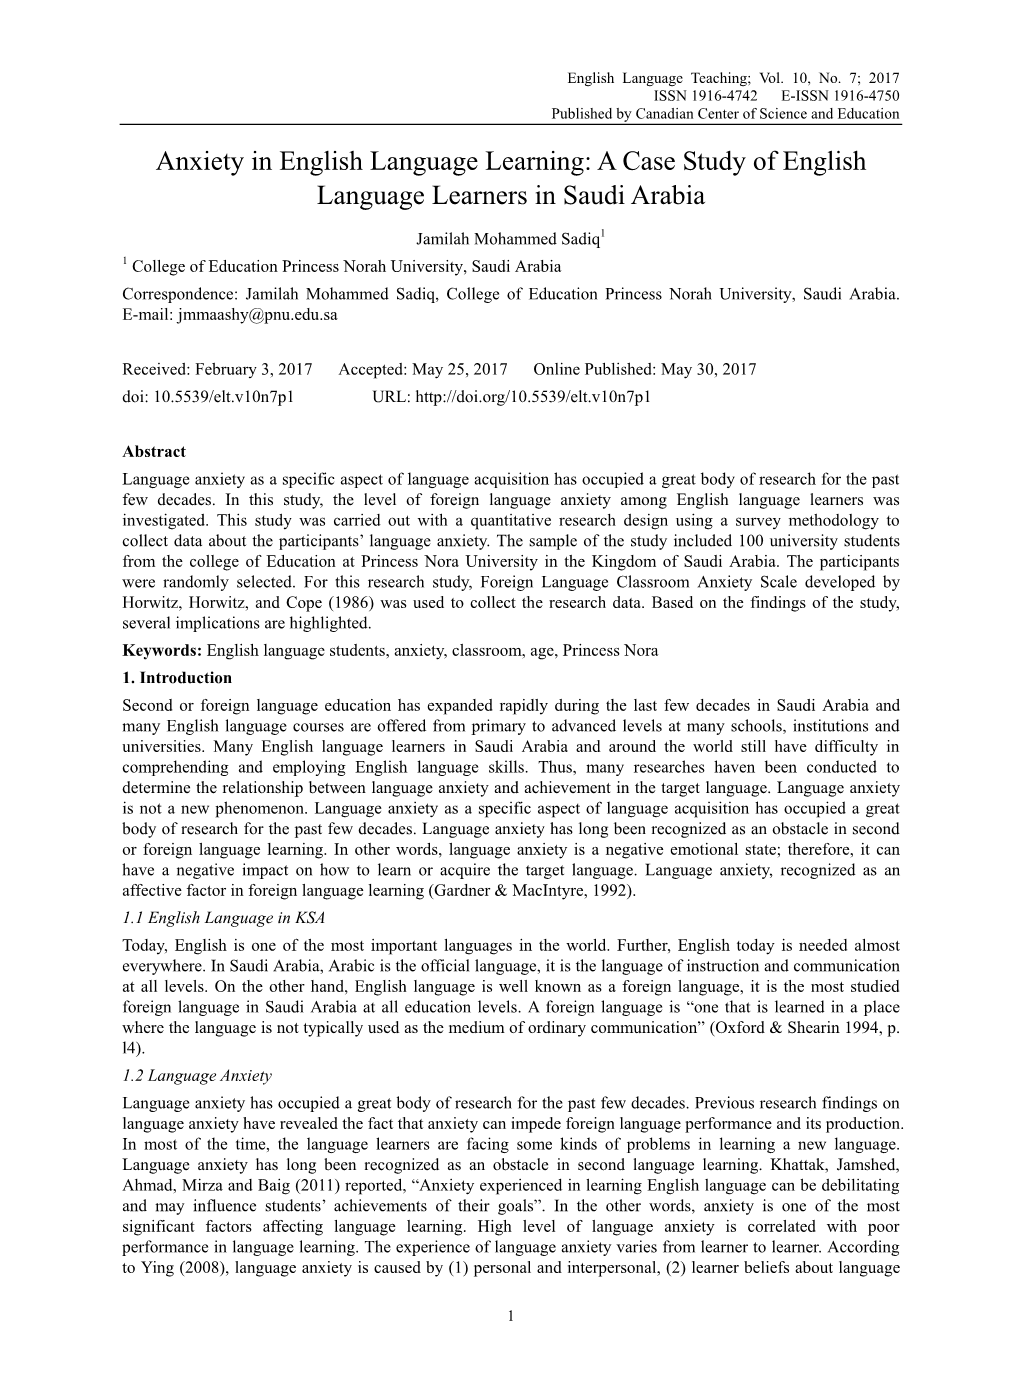 Anxiety in English Language Learning: a Case Study of English Language Learners in Saudi Arabia